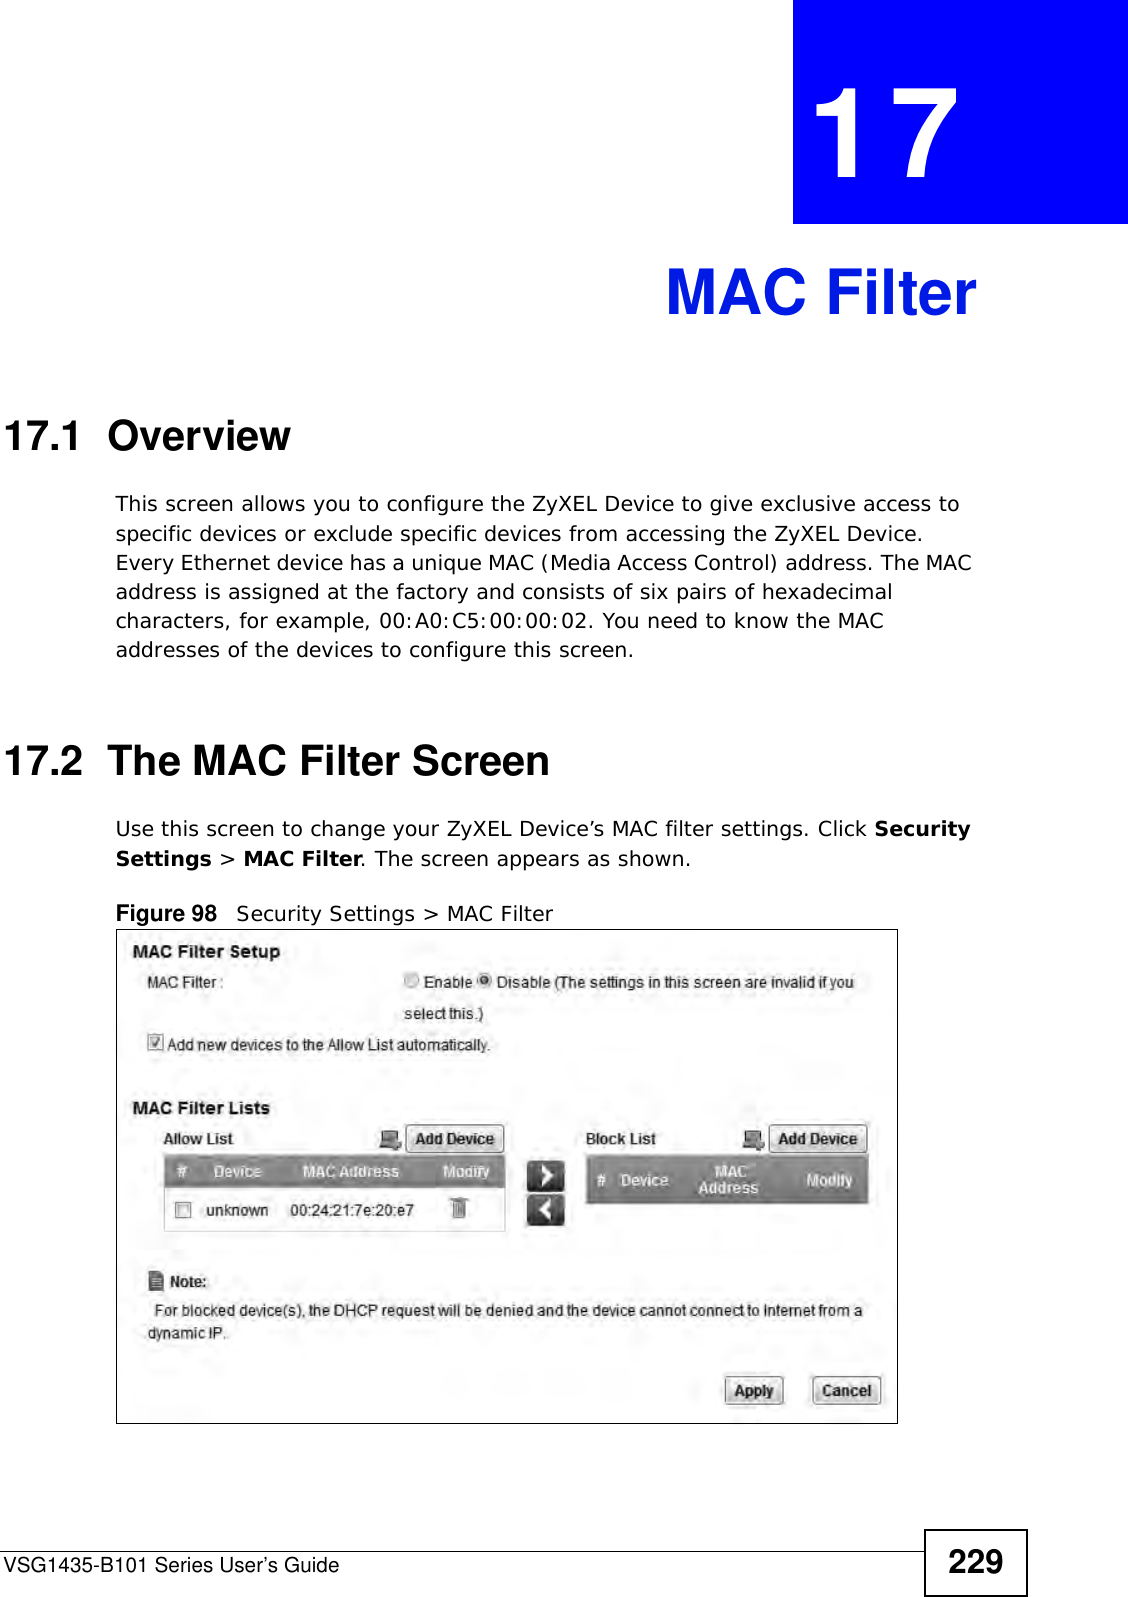 VSG1435-B101 Series User’s Guide 229CHAPTER  17 MAC Filter17.1  Overview This screen allows you to configure the ZyXEL Device to give exclusive access to specific devices or exclude specific devices from accessing the ZyXEL Device. Every Ethernet device has a unique MAC (Media Access Control) address. The MAC address is assigned at the factory and consists of six pairs of hexadecimal characters, for example, 00:A0:C5:00:00:02. You need to know the MAC addresses of the devices to configure this screen.17.2  The MAC Filter ScreenUse this screen to change your ZyXEL Device’s MAC filter settings. Click Security Settings &gt; MAC Filter. The screen appears as shown.Figure 98   Security Settings &gt; MAC Filter